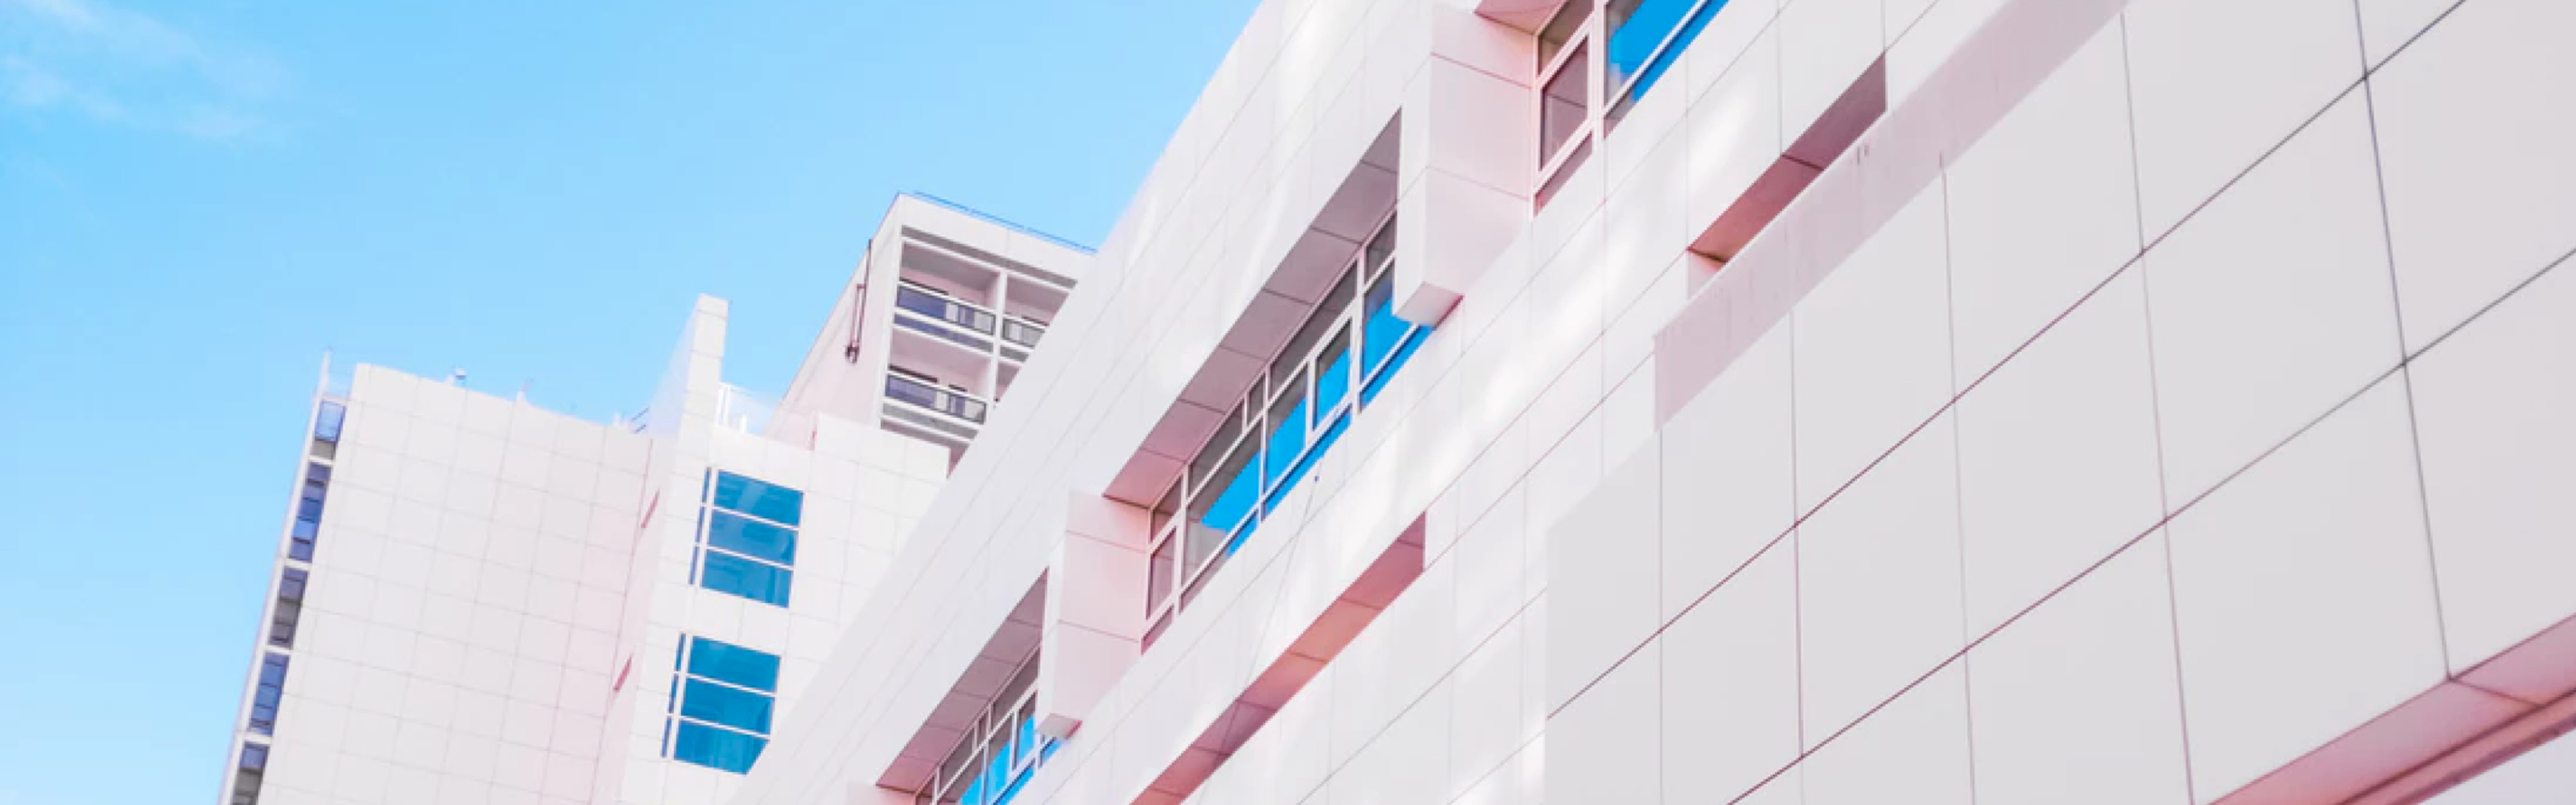 A dutch angle looking up at the corners of two white apartment buildings against a clear blue sky. A subtle pink filter has been applied to the image.